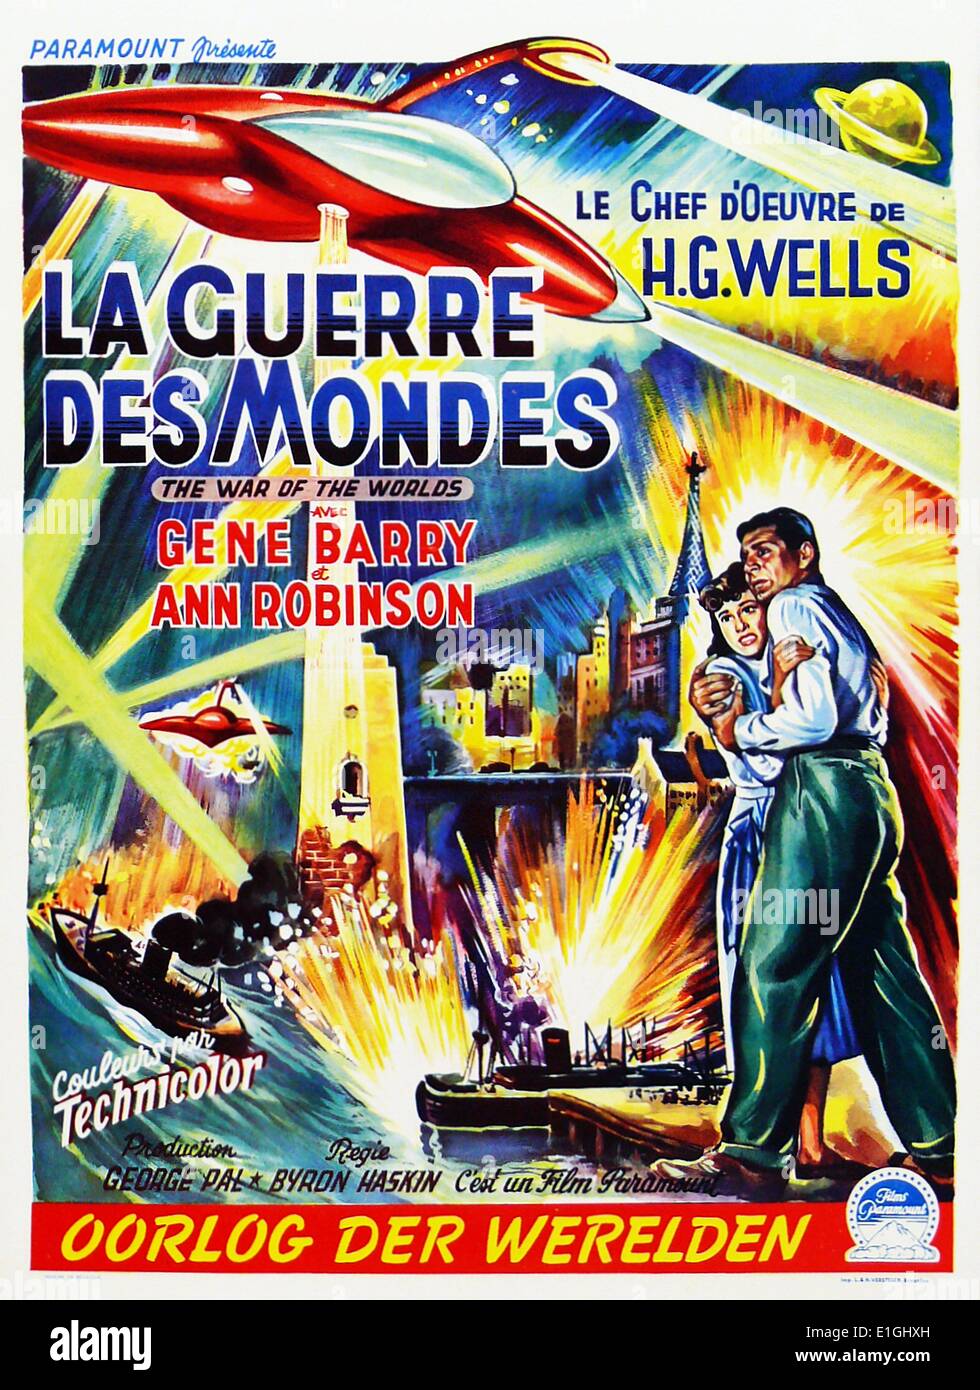 La Guerre Des Mondes (The War of the Worlds) starring Gene Barry and Ann Robinson a 1953 Paramount Pictures technicolor science fiction film. Stock Photo